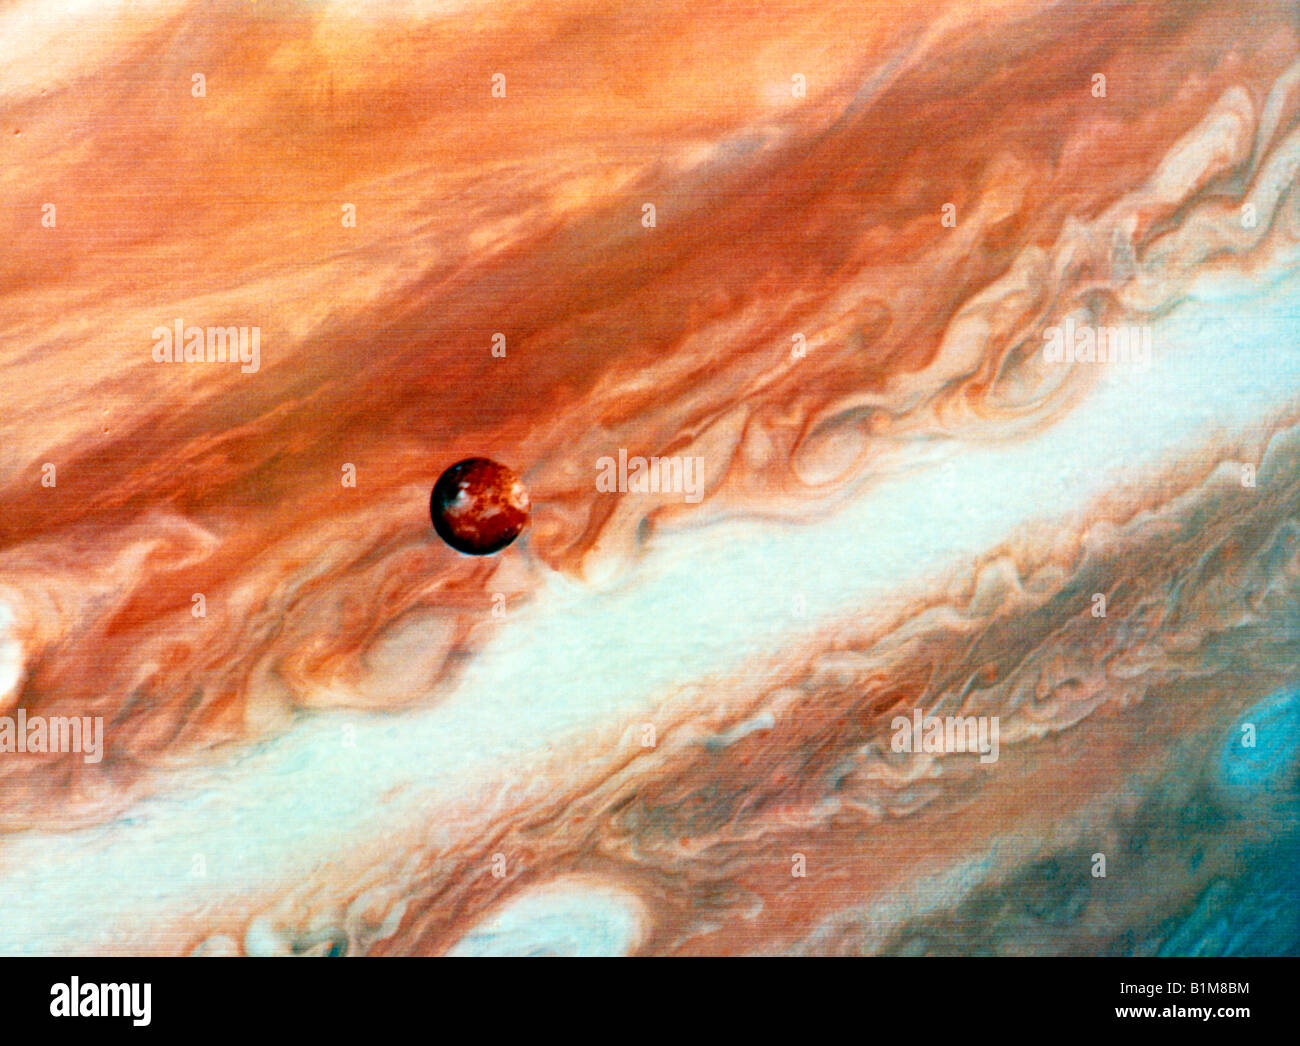 Jupiter With The Moon Io The Innermost Of The 4 Largest Moons Orbiting Jupiter Stock Photo